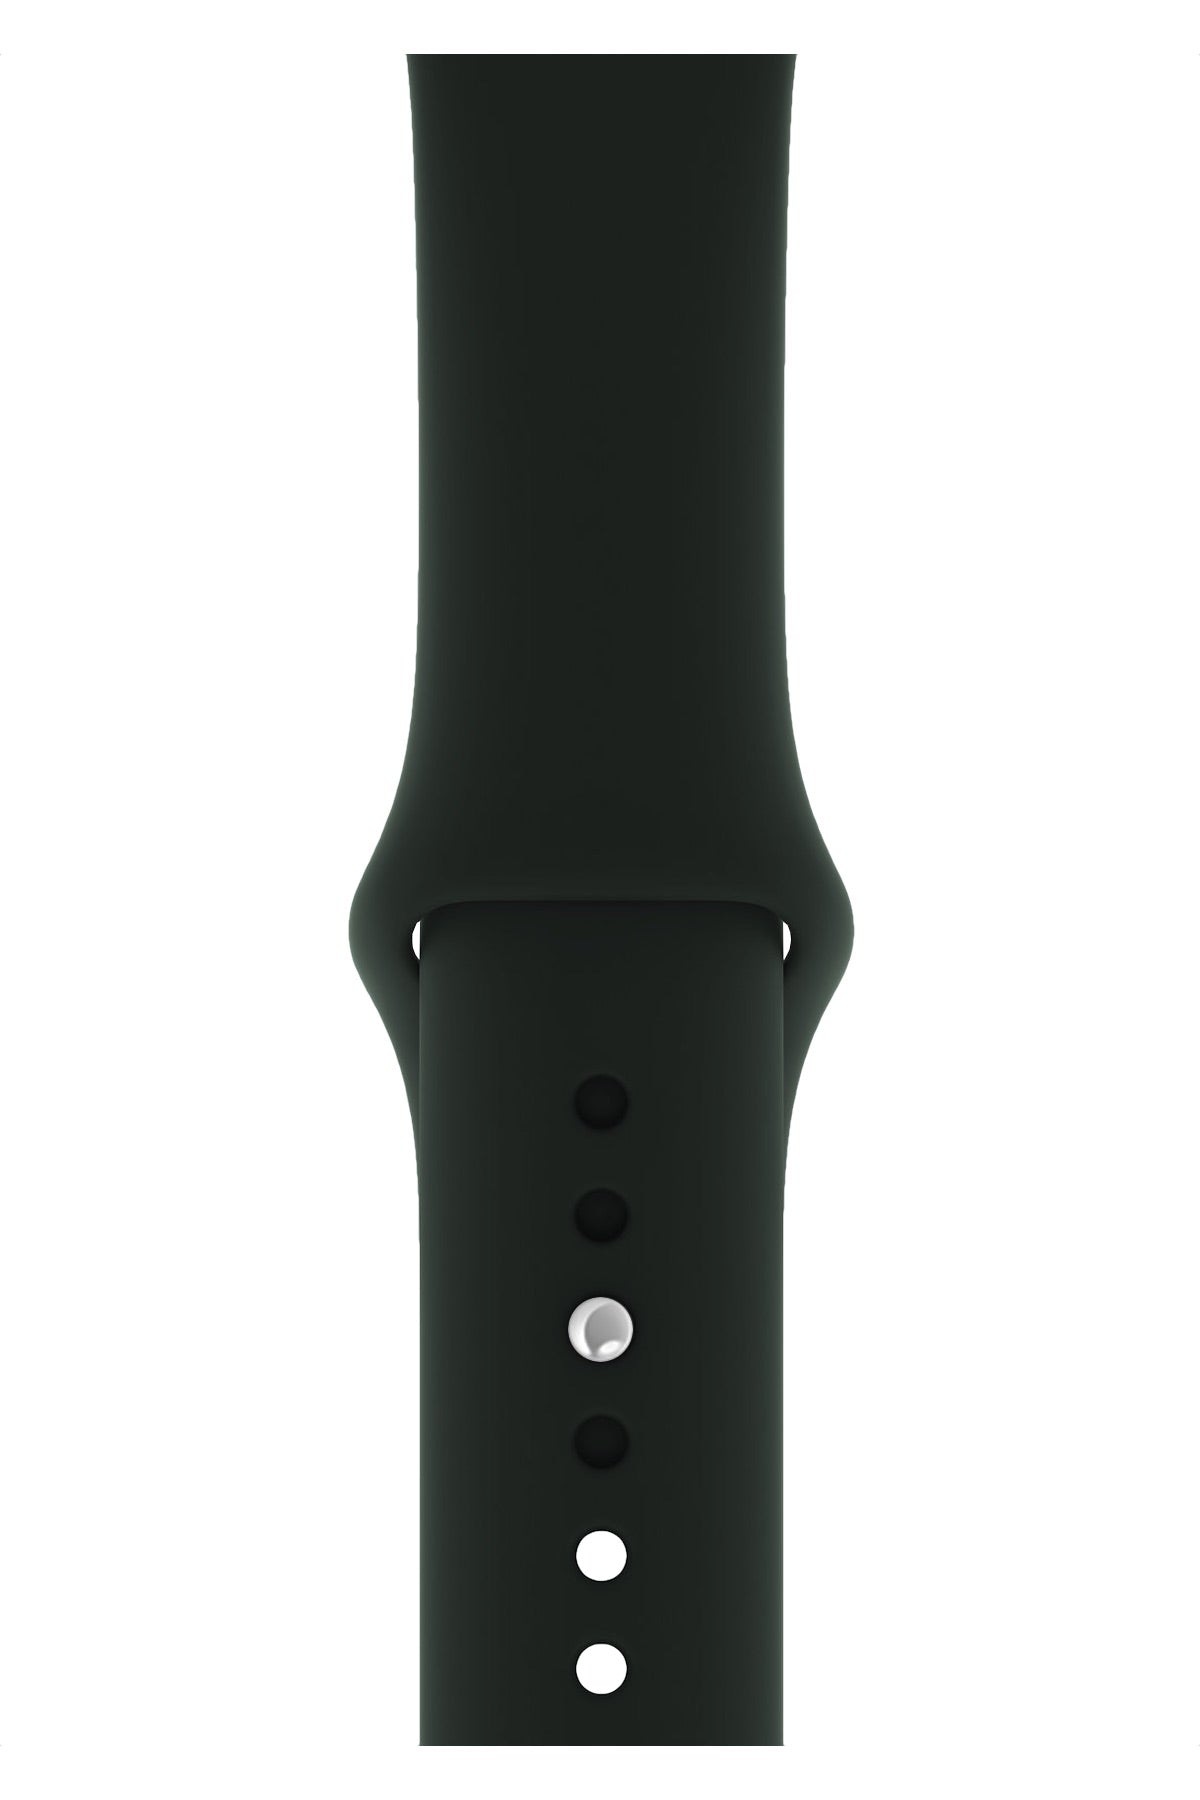 Apple Watch Compatible Silicone Sport Band Night Green